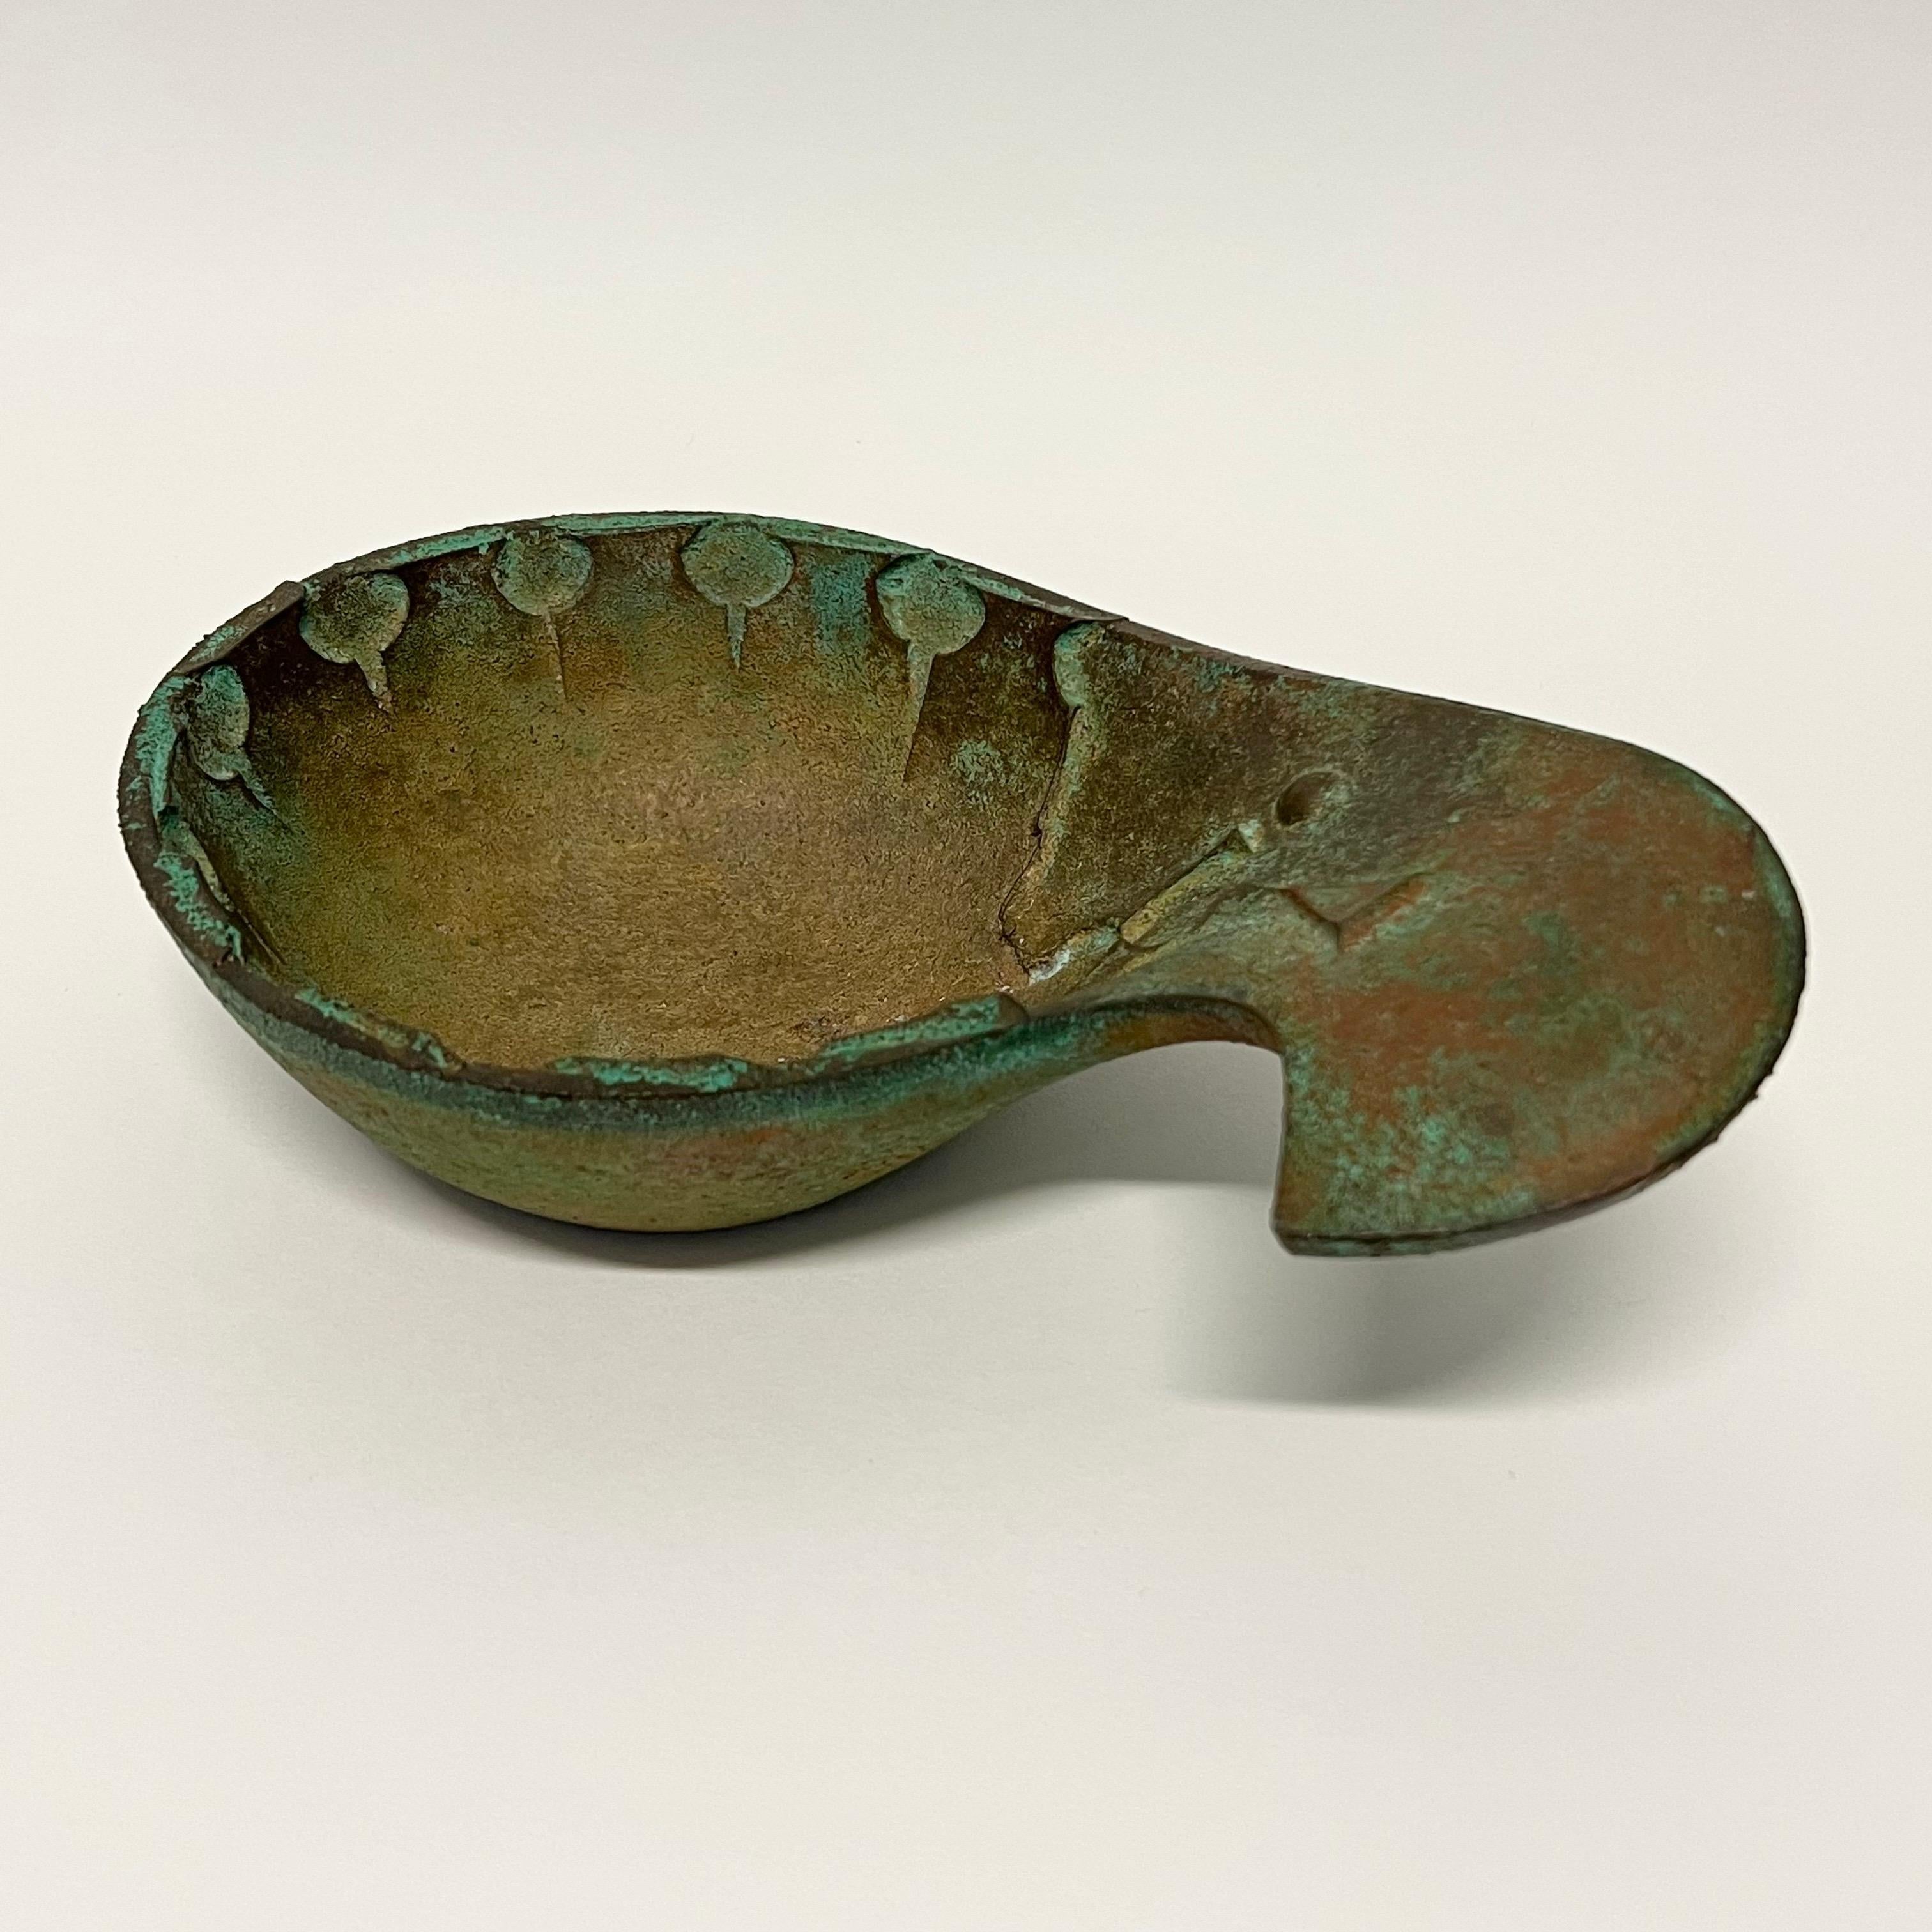 Beautiful early cast modernist bronze bowl by artist Paolo Solari c1960s. 

Born in 1919 in Turin, Italy, architect Paolo Soleri came to the US in 1947 to study under Frank Lloyd Wright. Soleri and Wright had vastly different views on the shape